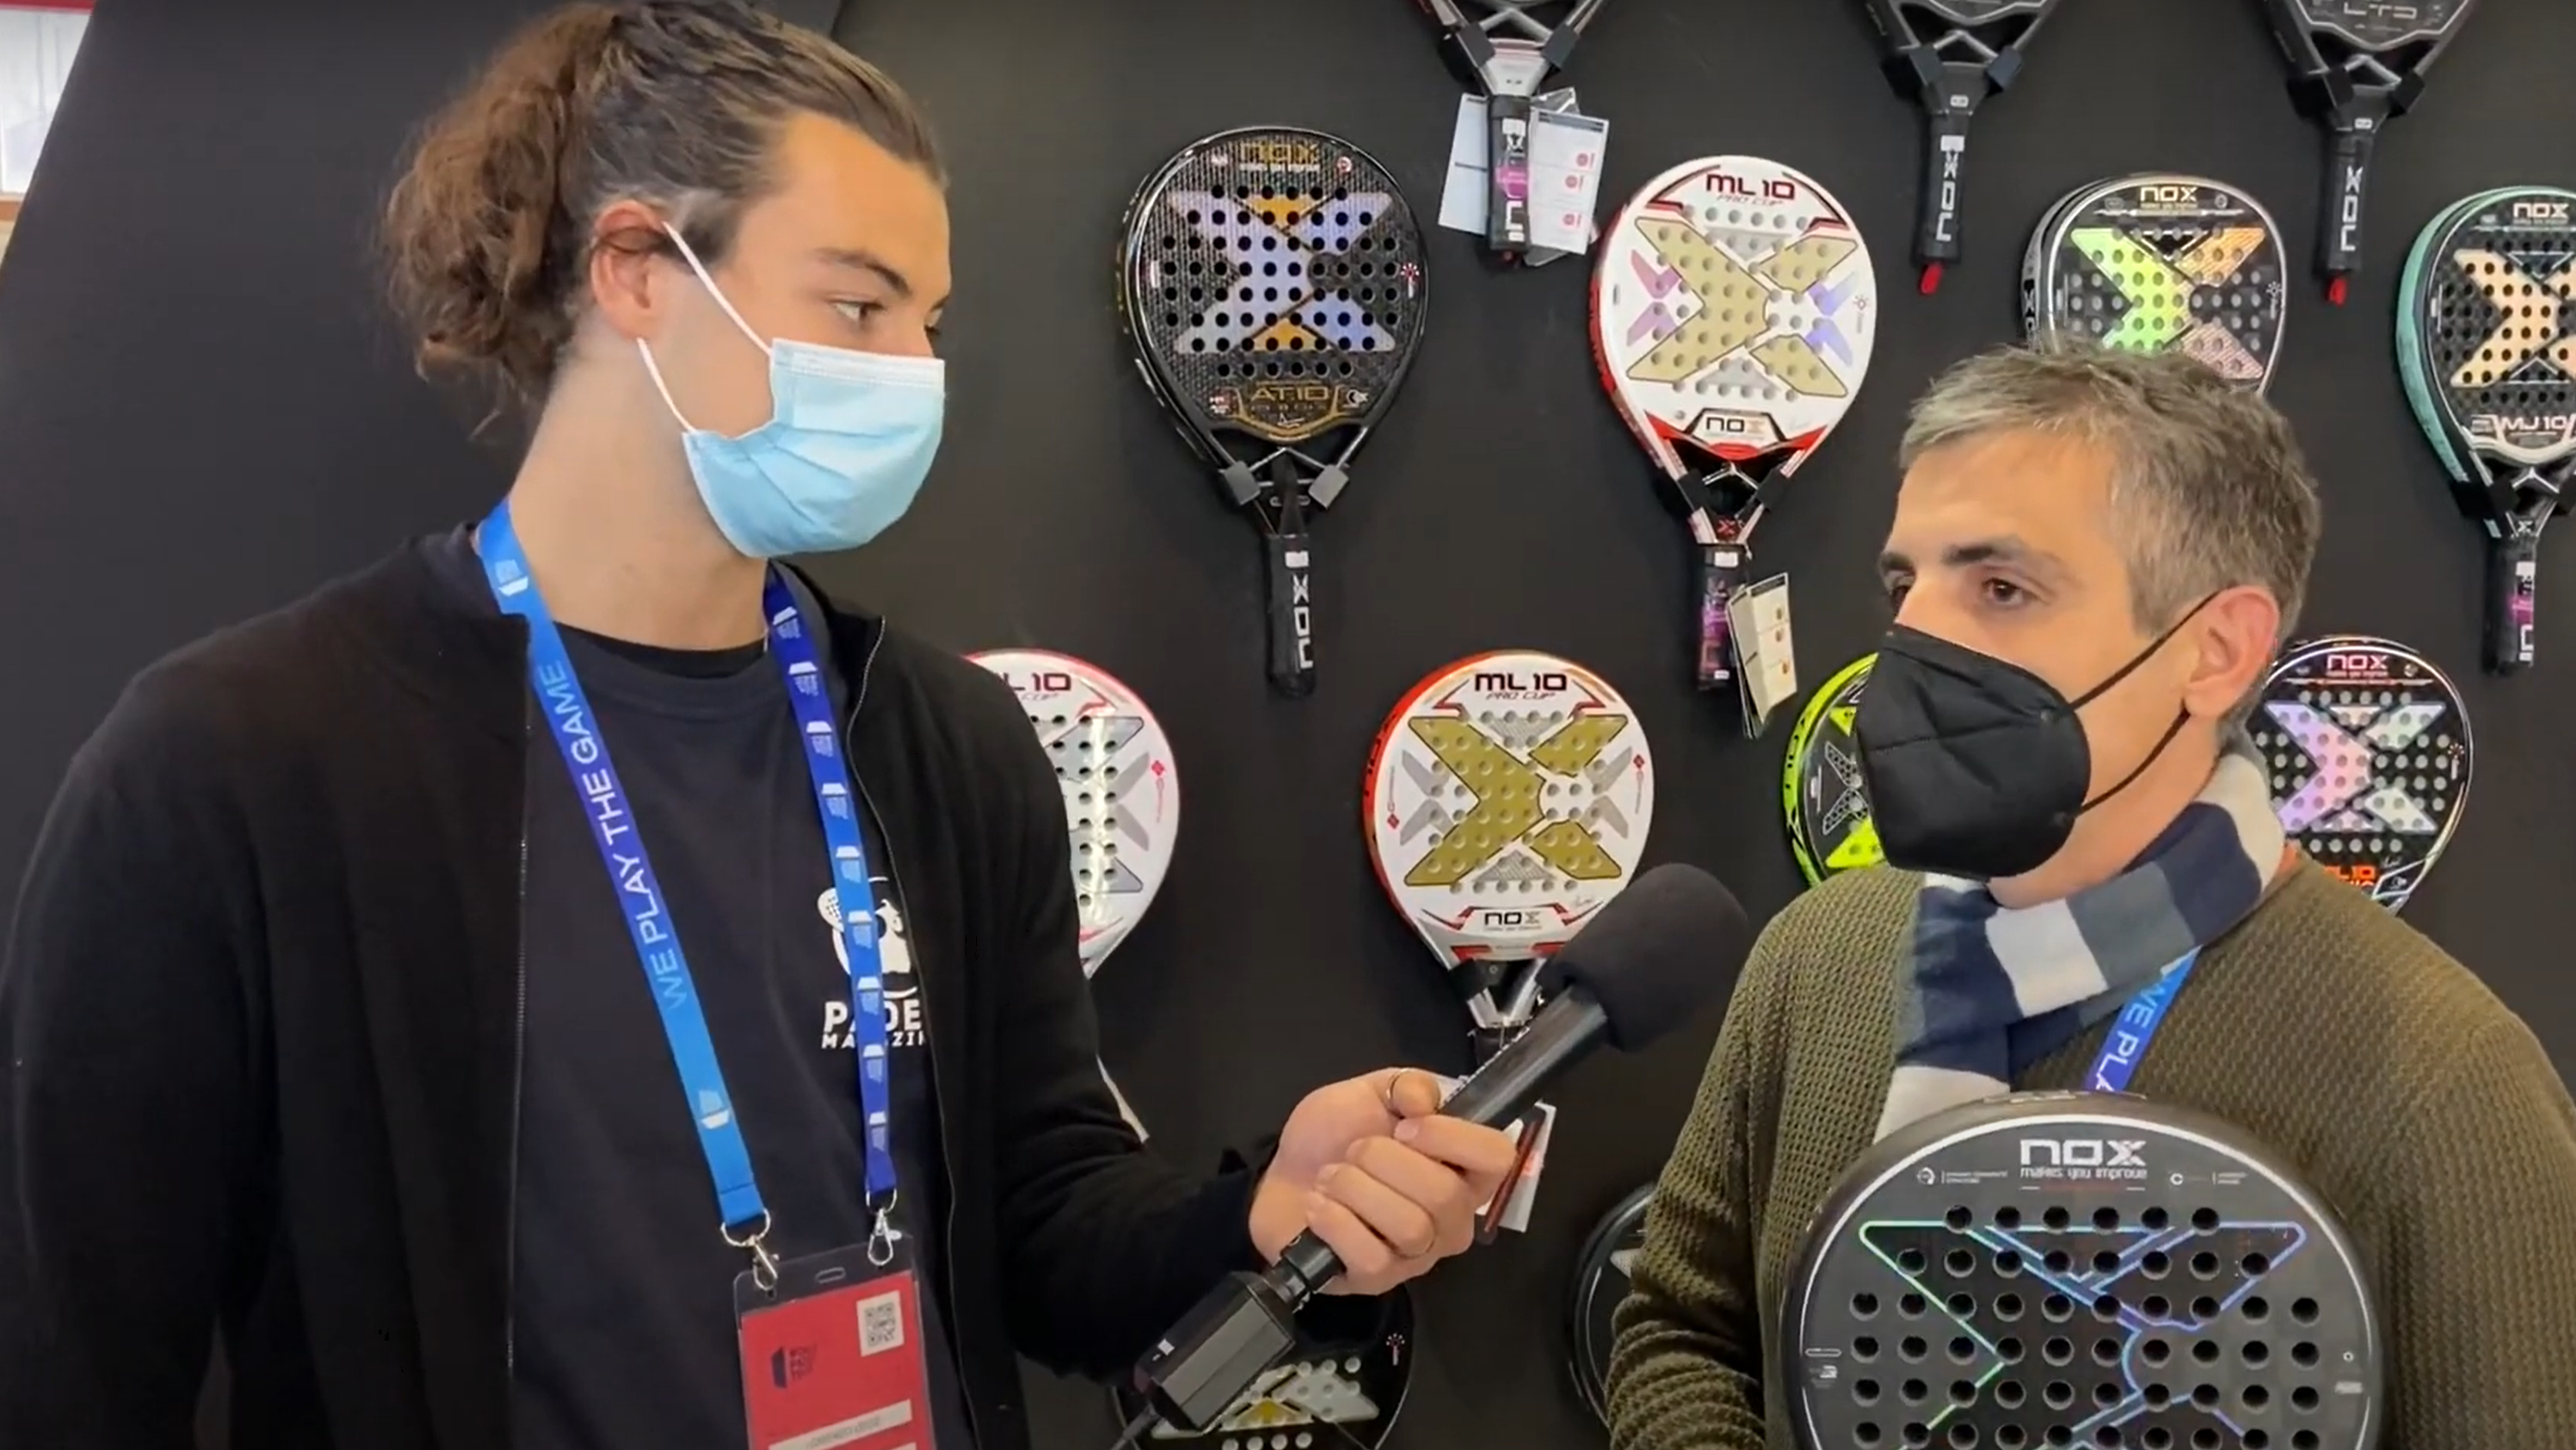 Sito Bastida: “A year of madness for the padel and for Nox ”